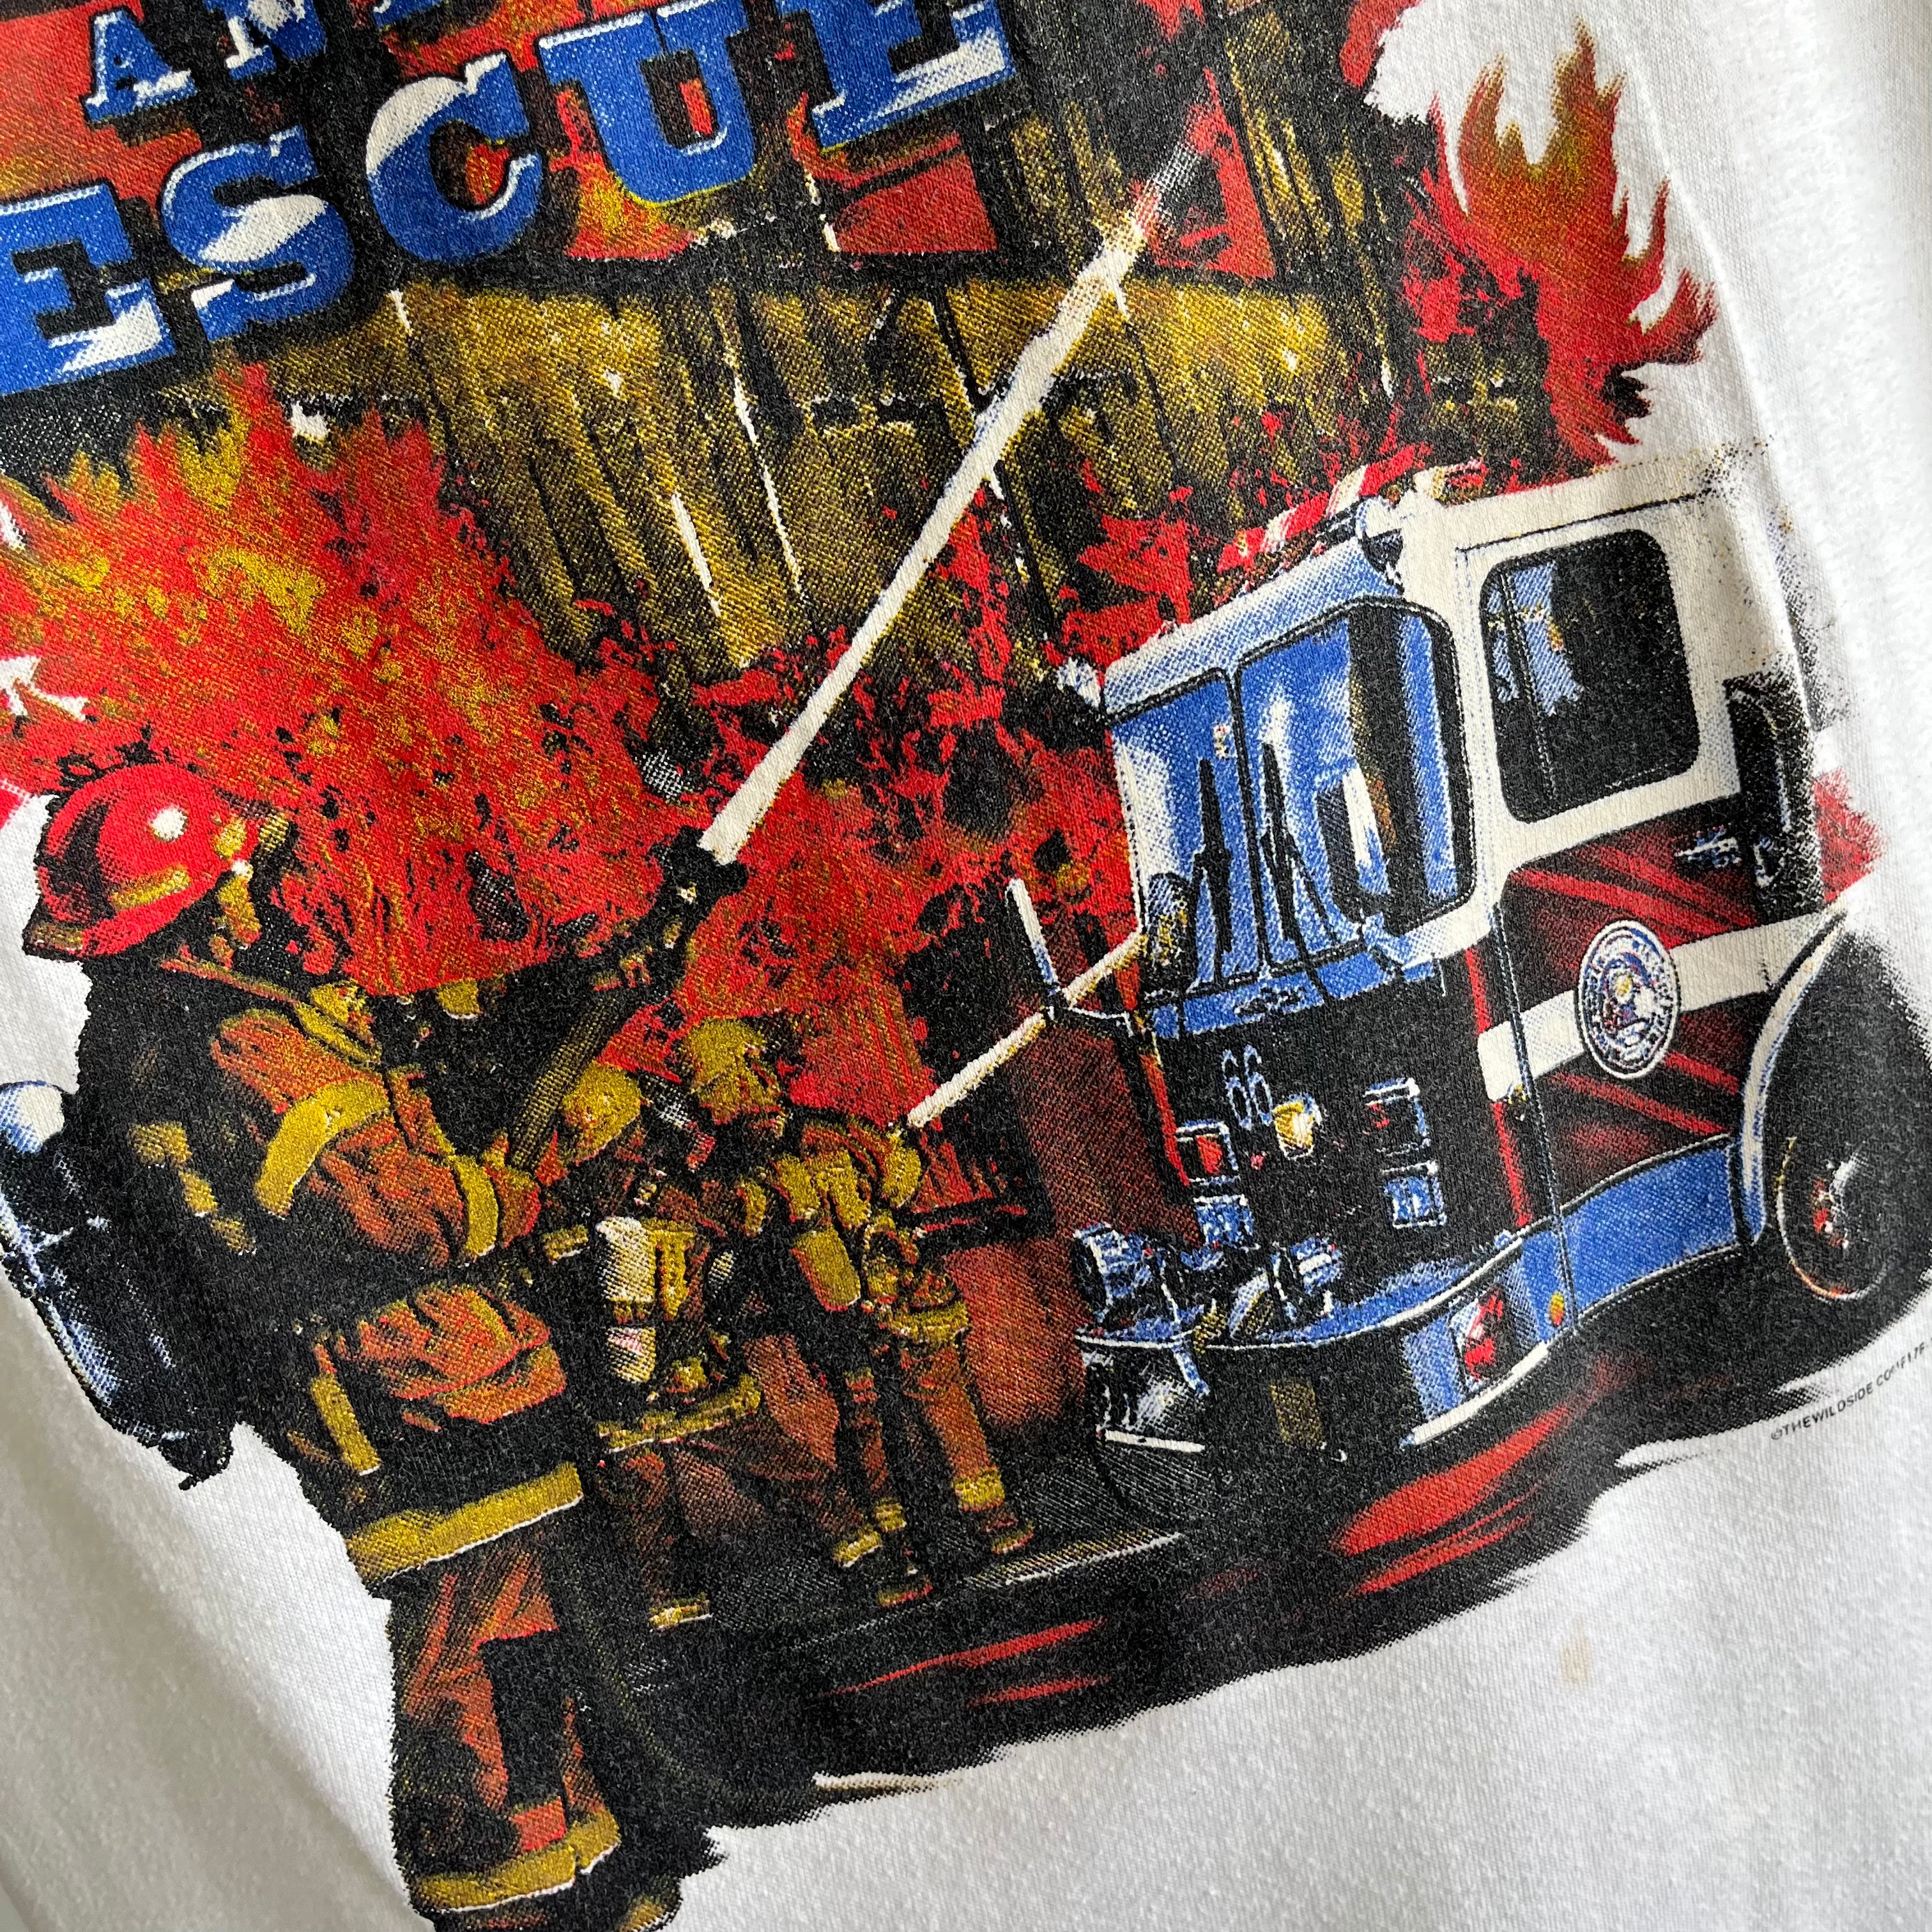 1970/80s Fire and Rescue Super Slouchy T-Shirt